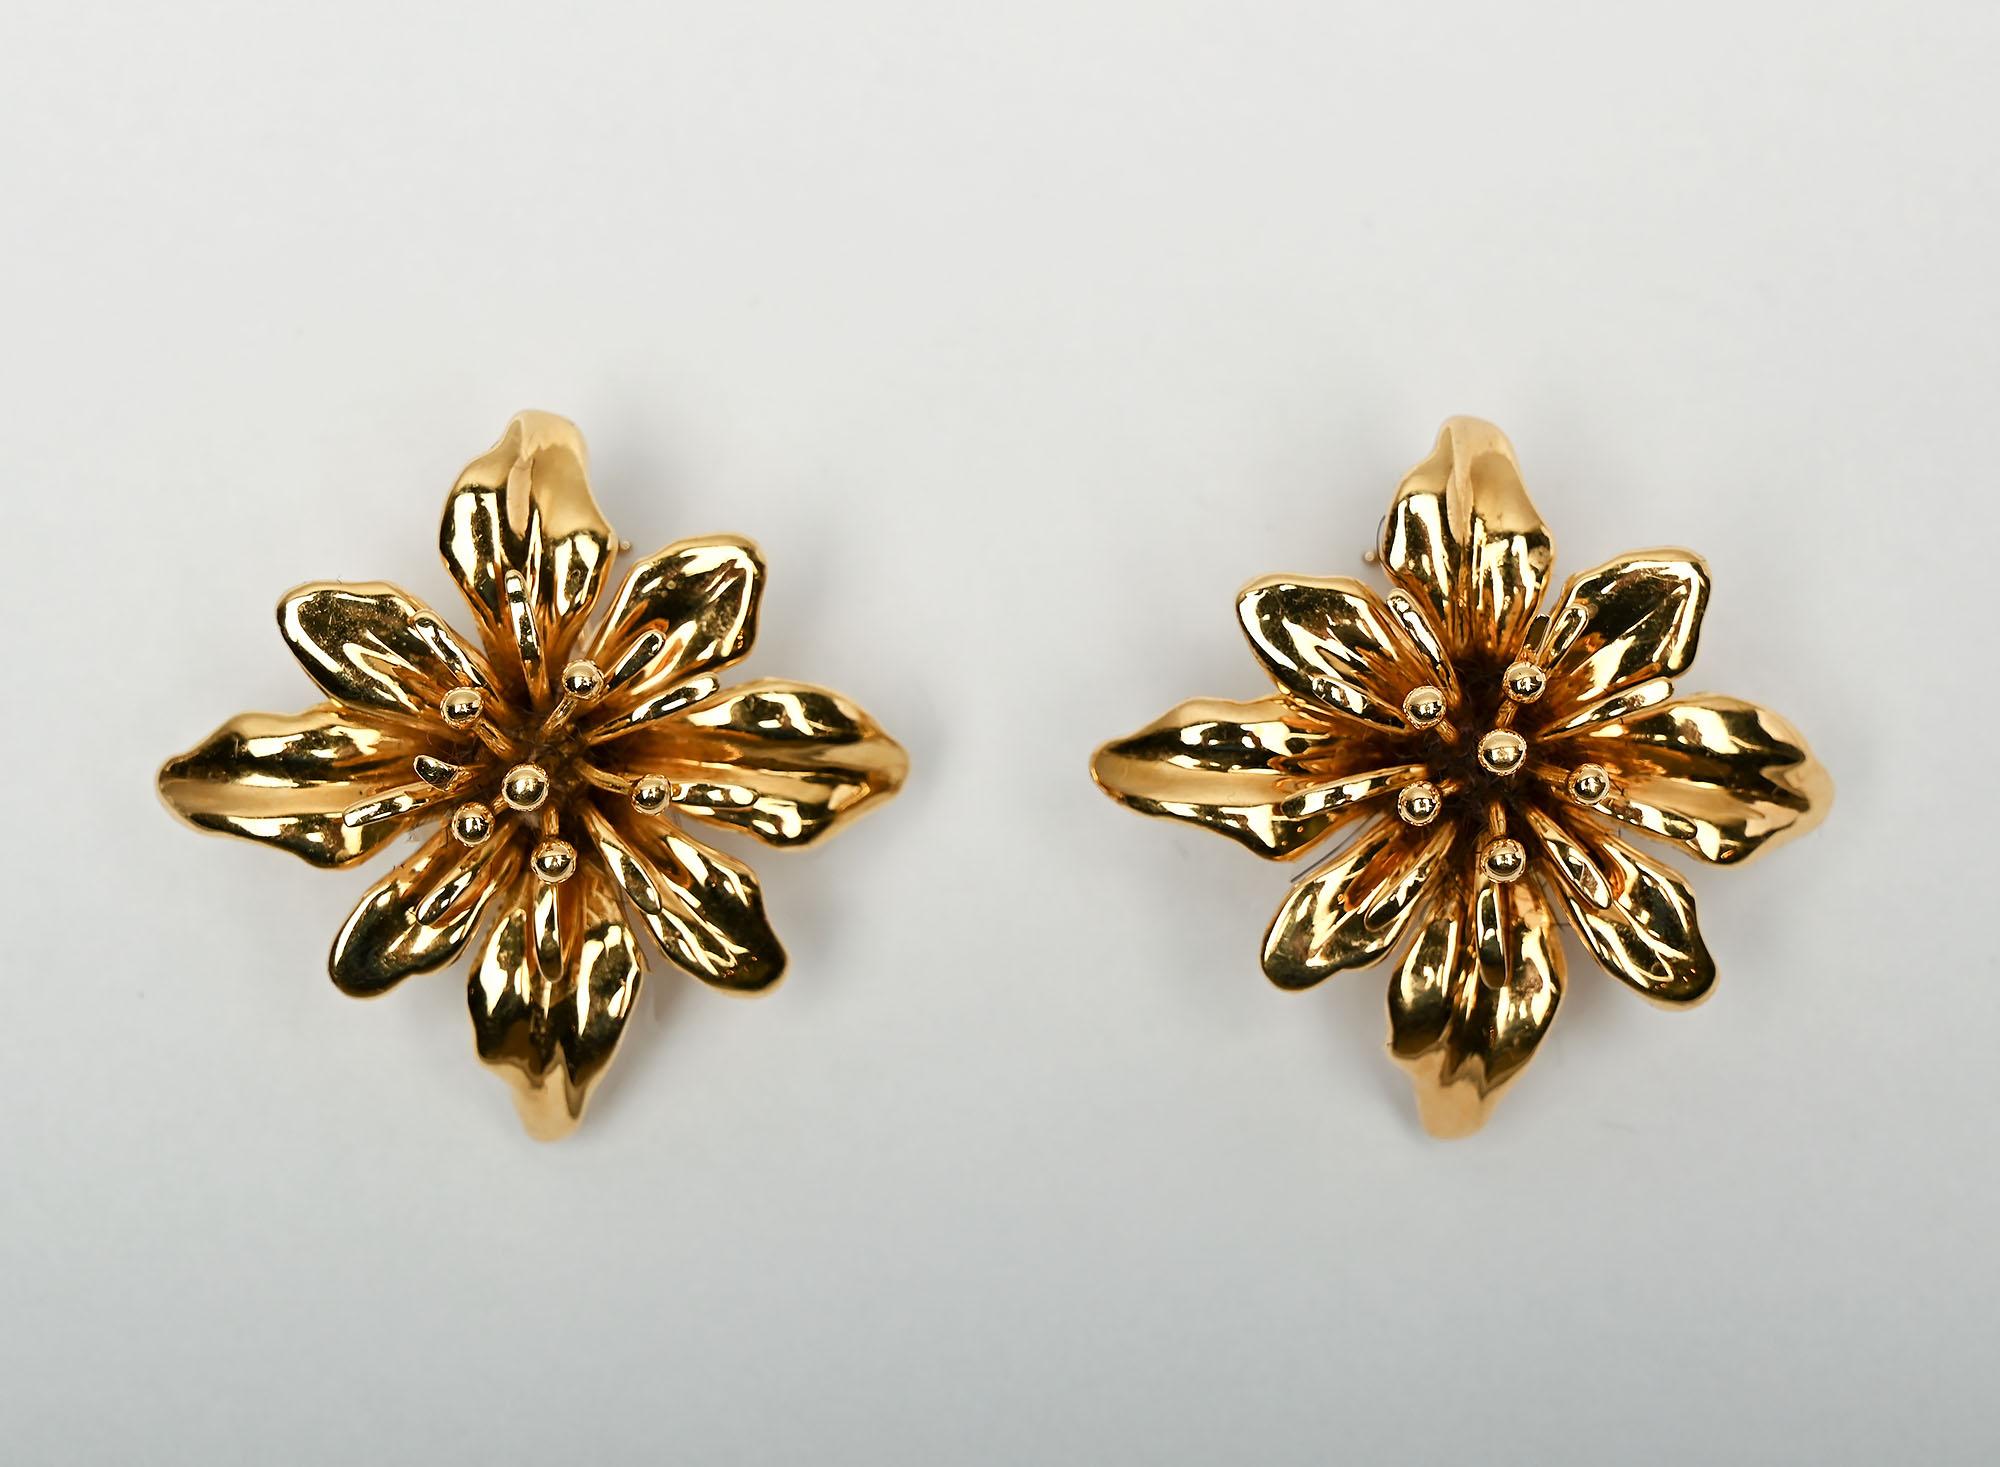 Valentin Magro is known for the fine detailing of his work and these earrings are no exception. There are two layers of petals and a cluster of pistils in the center. The earrings have a lovely sculptural form. They measure 1 5/16